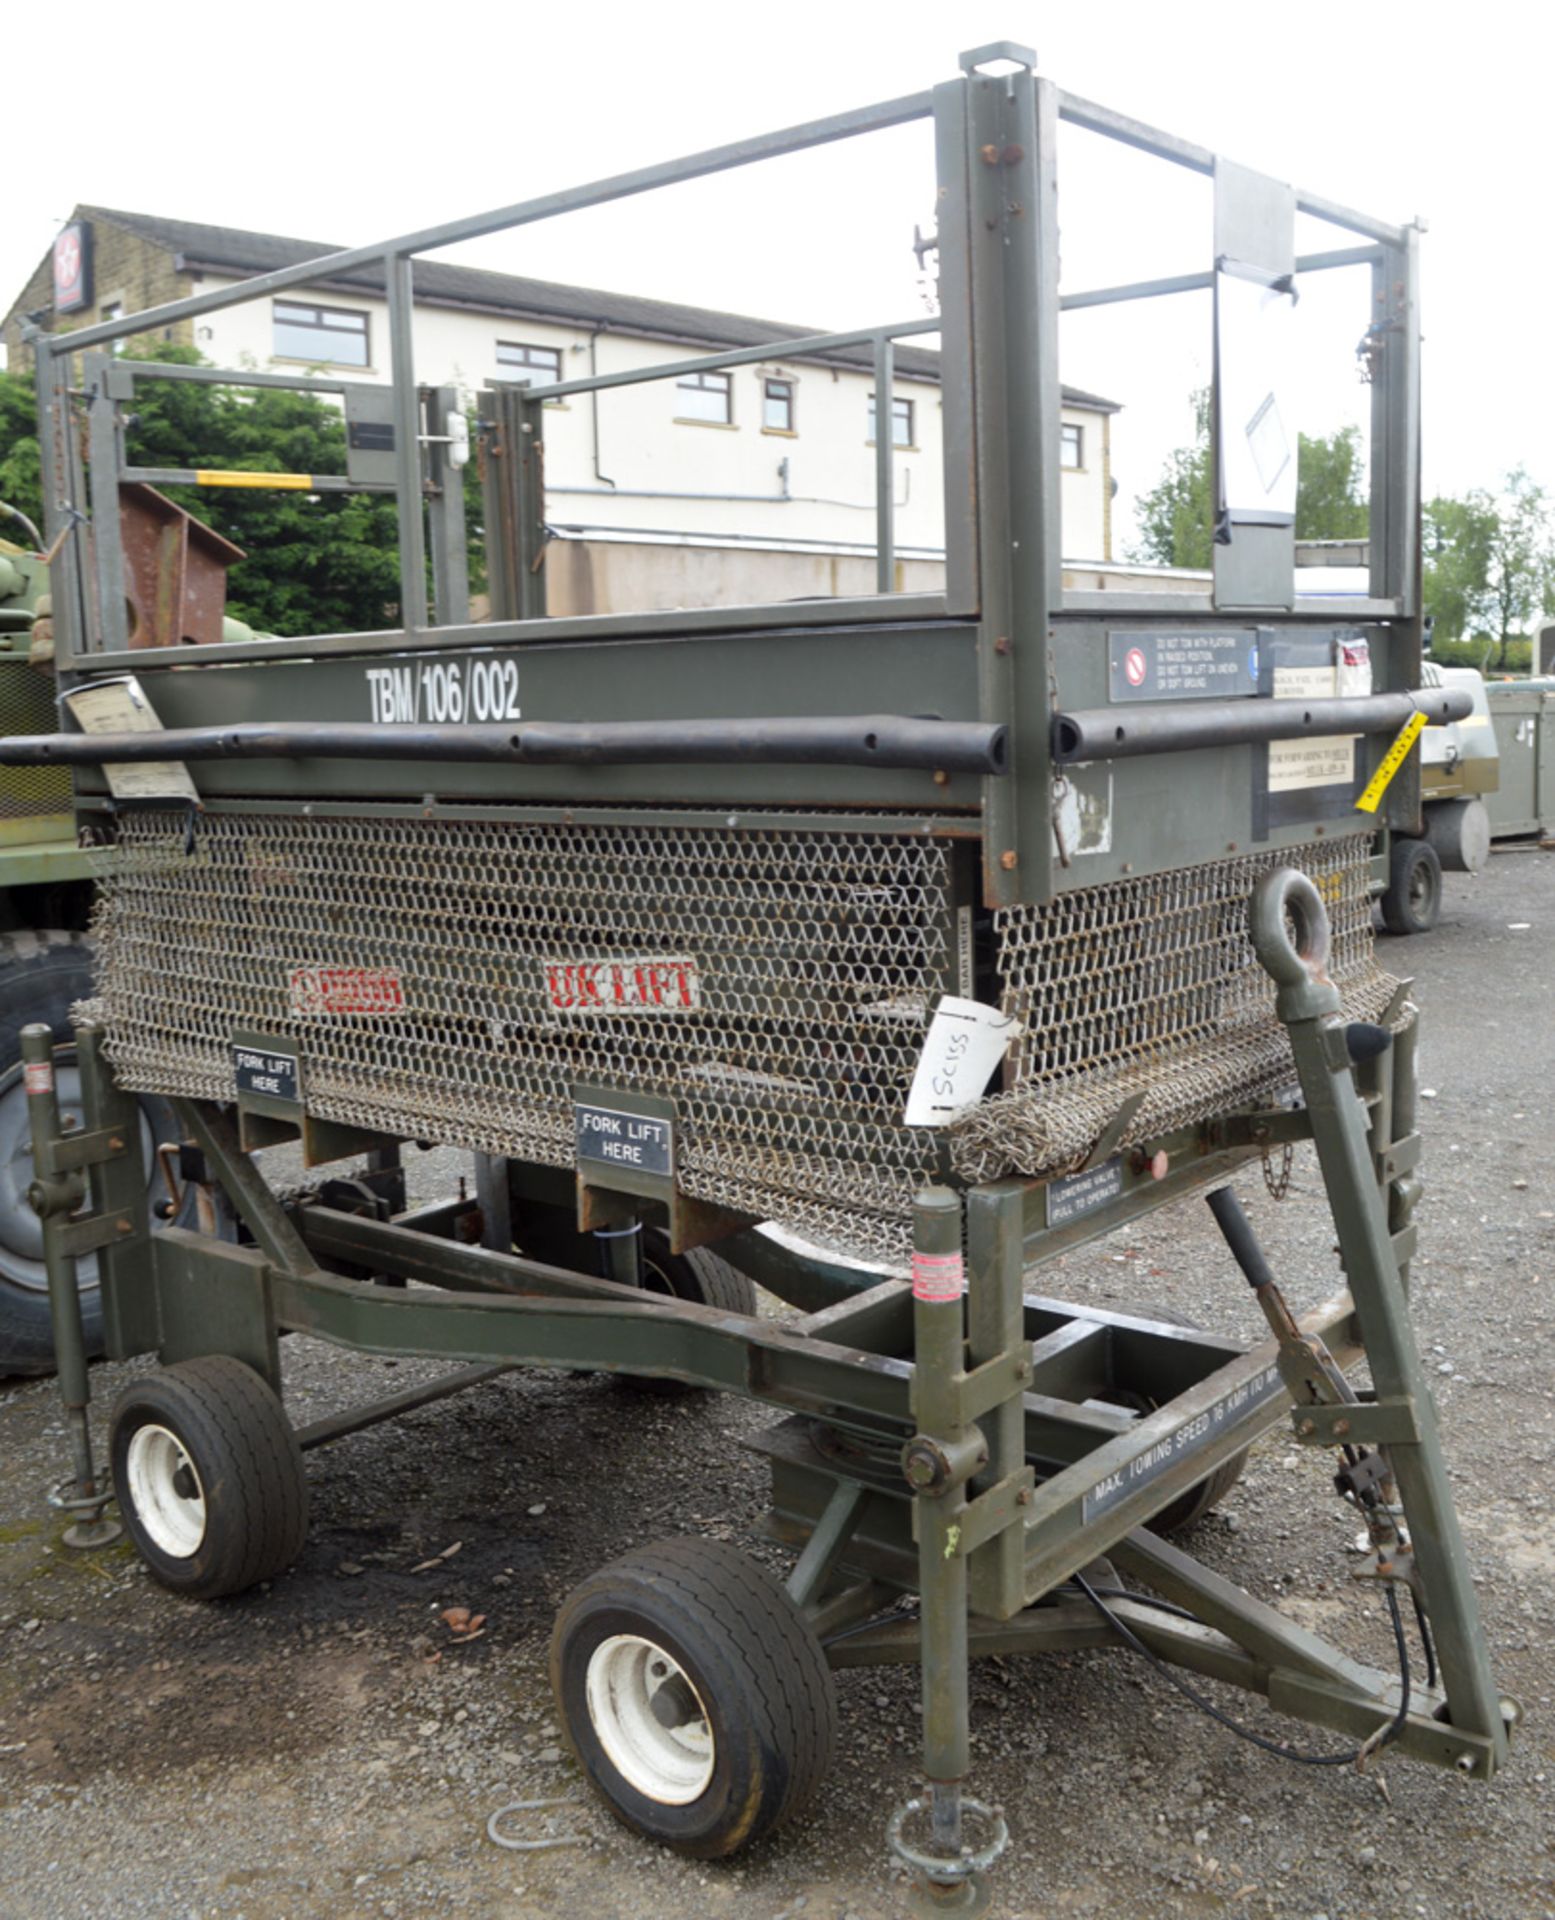 UK Lift manual hydraulic site tow mobile access platform (Ex MOD) - Image 2 of 5